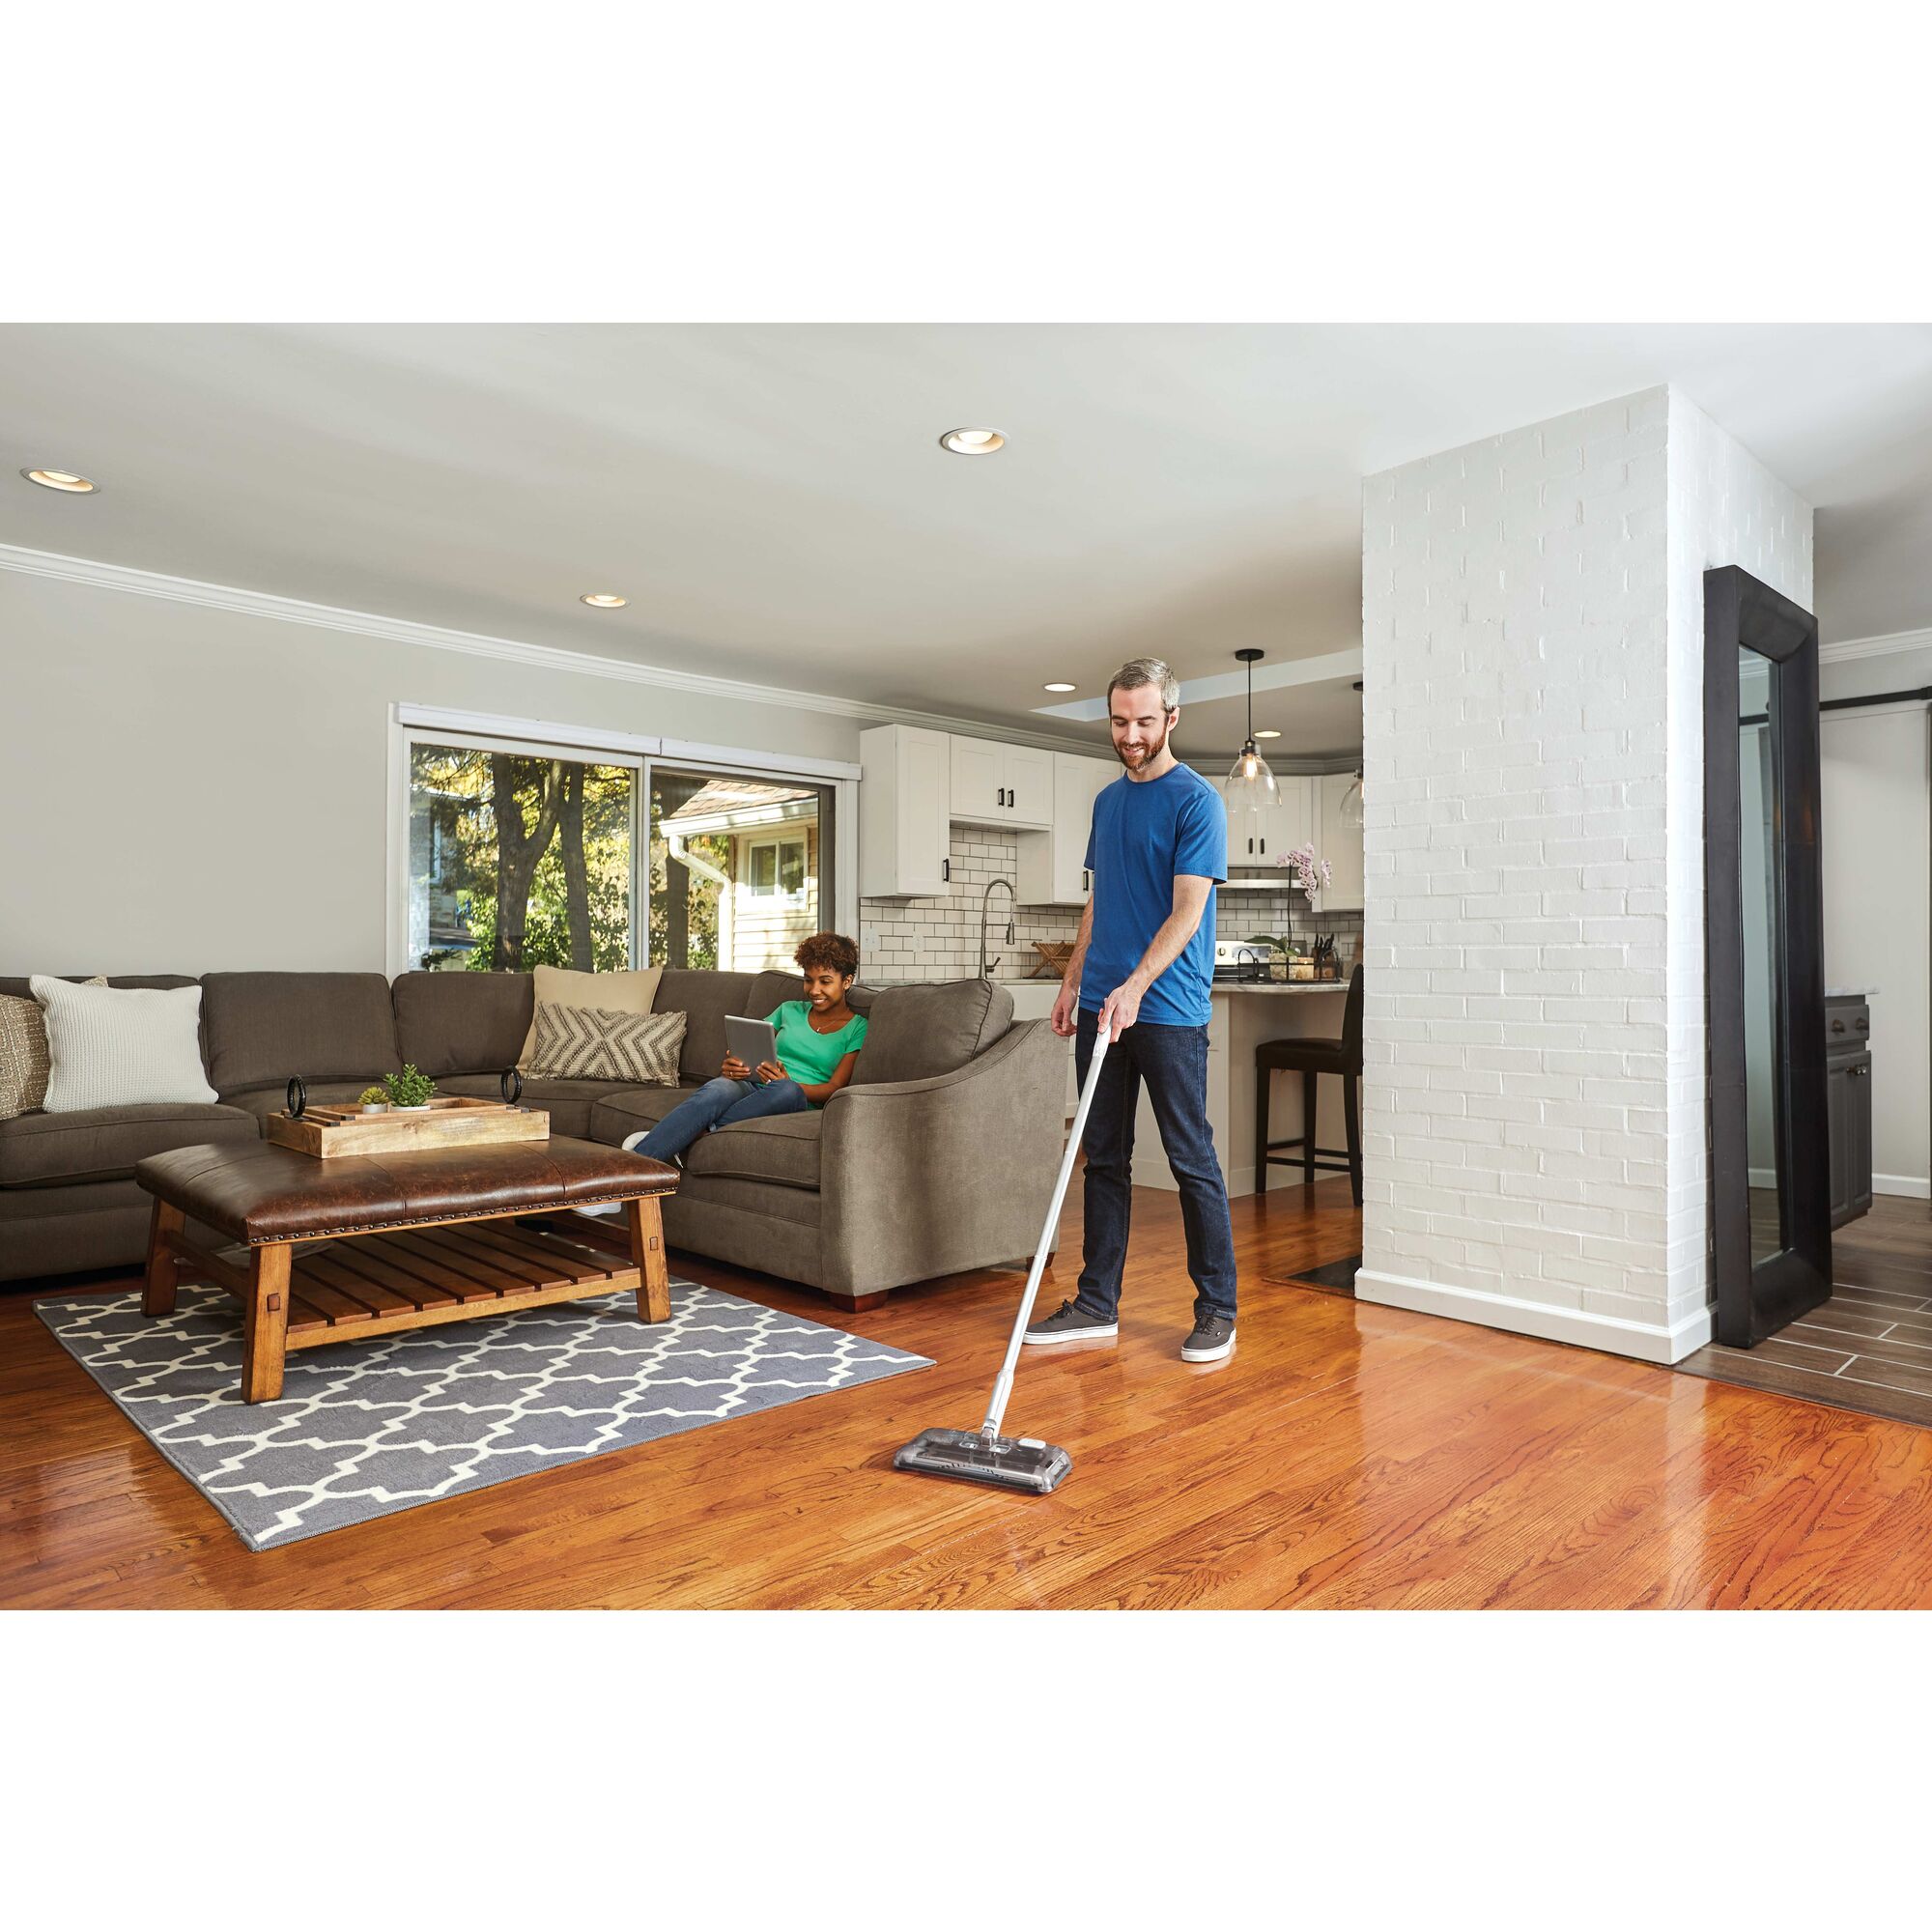 Person using black and decker 50 Minute Powered Floor Sweeper to clean a wooden floor in a living room